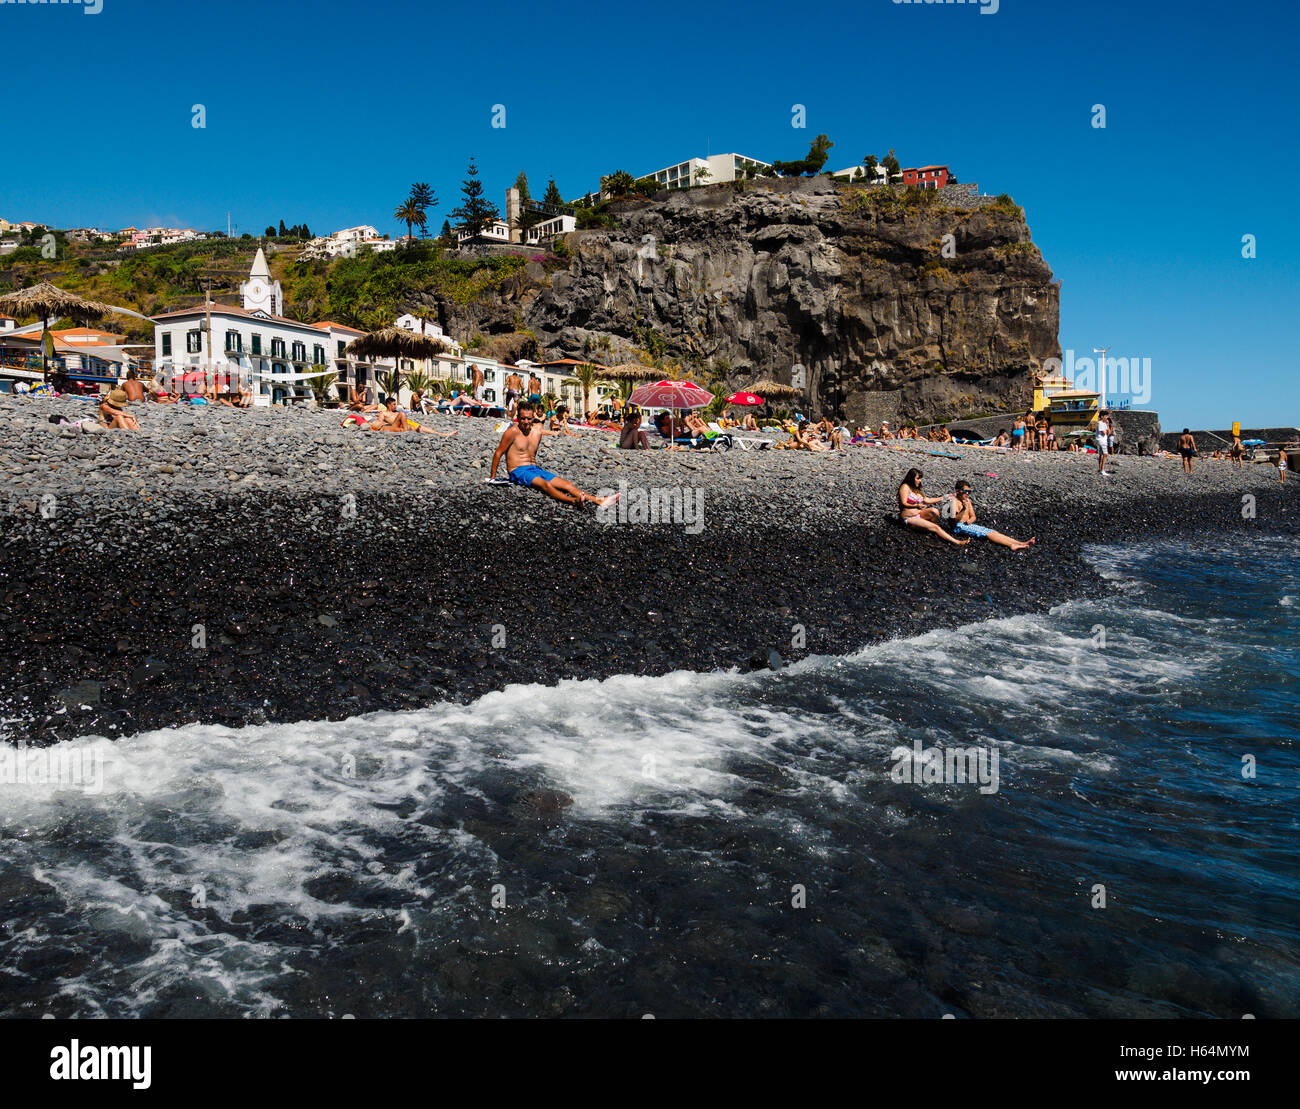 Tourists enjoy the beach of Ponta do Sol with the Enotel hotel on the Portuguese island of Madeira Stock Photo